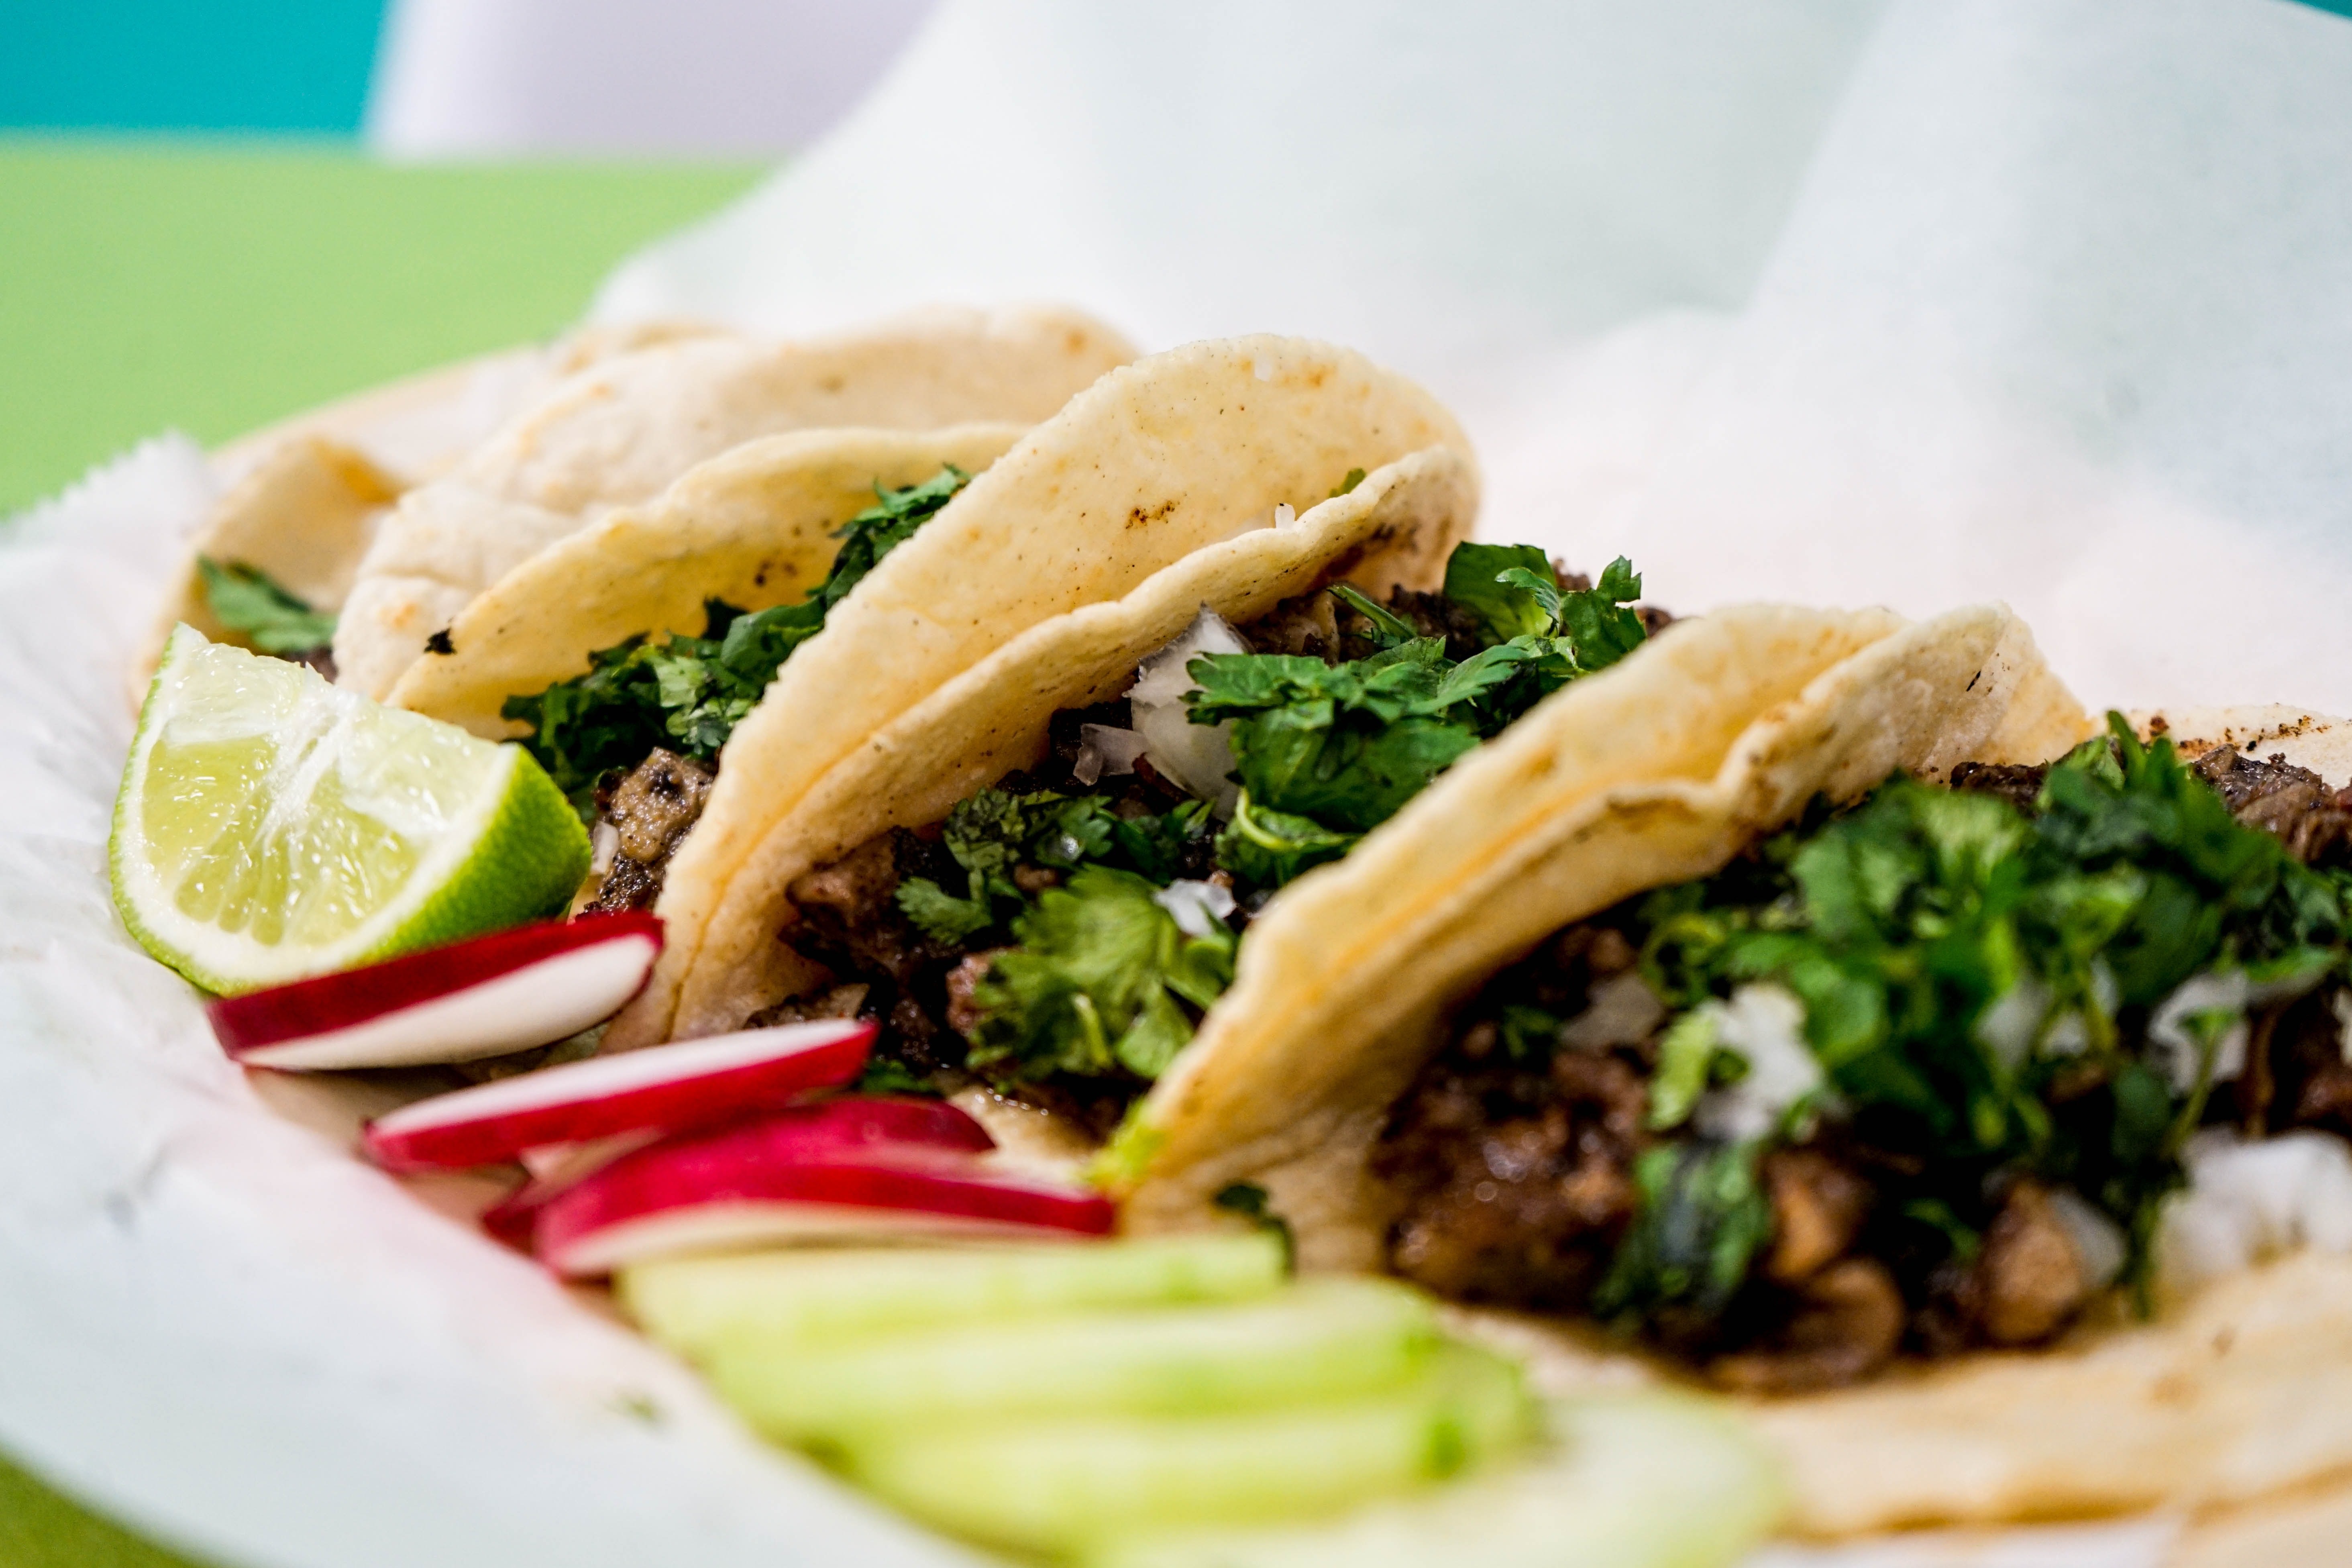 Craving Mexican Food? Order Takeout From Los Encinos Restaurant